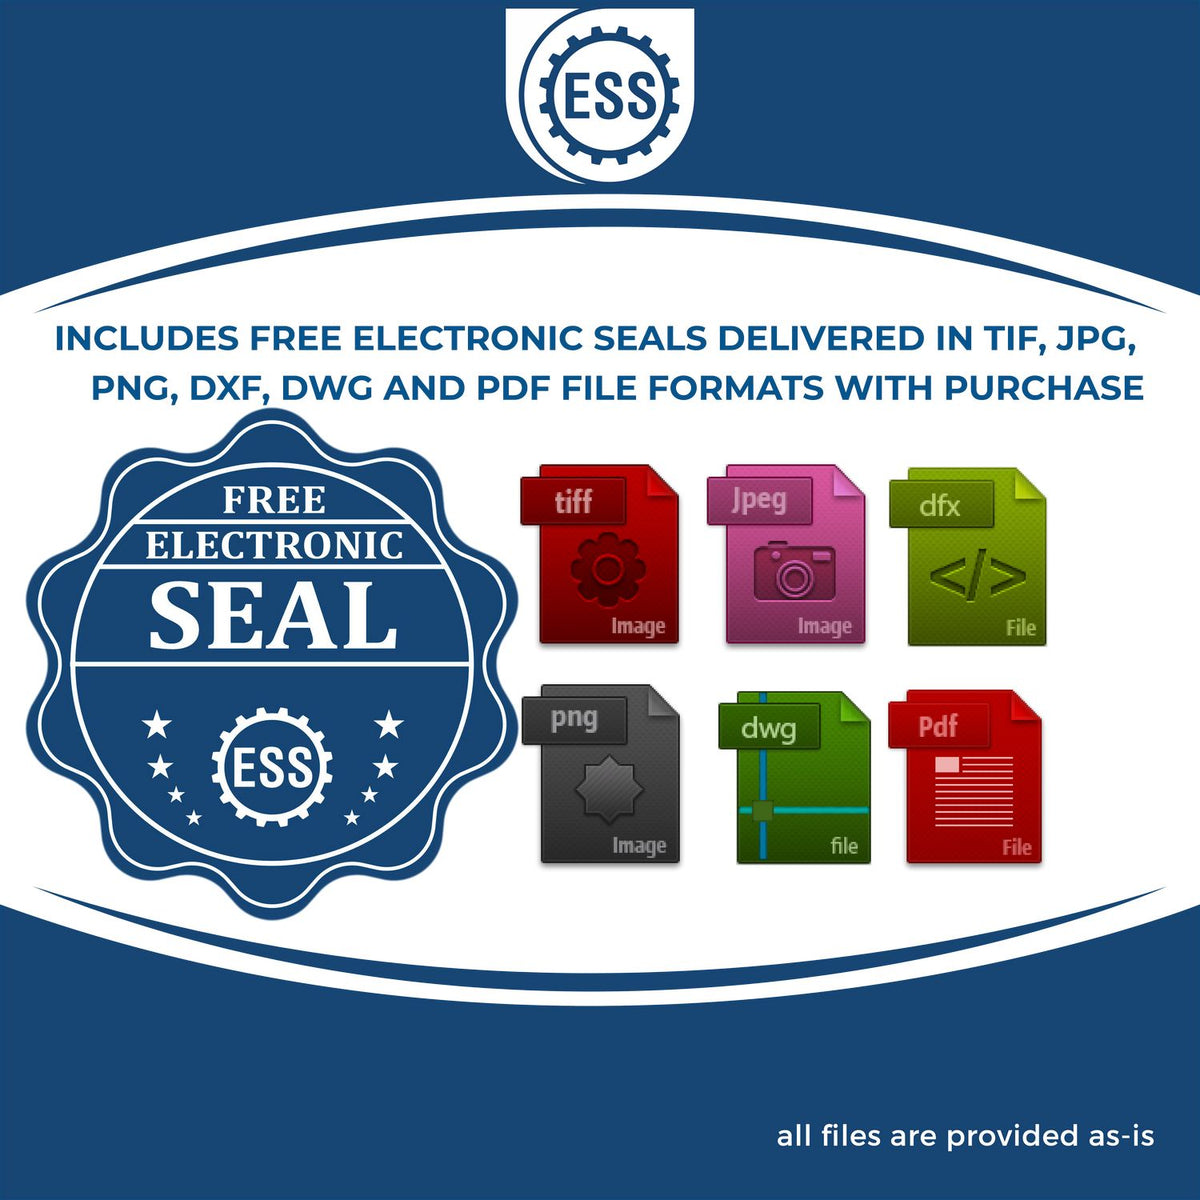 An infographic for the free electronic seal for the Premium MaxLight Pre-Inked Michigan Engineering Stamp illustrating the different file type icons such as DXF, DWG, TIF, JPG and PNG.